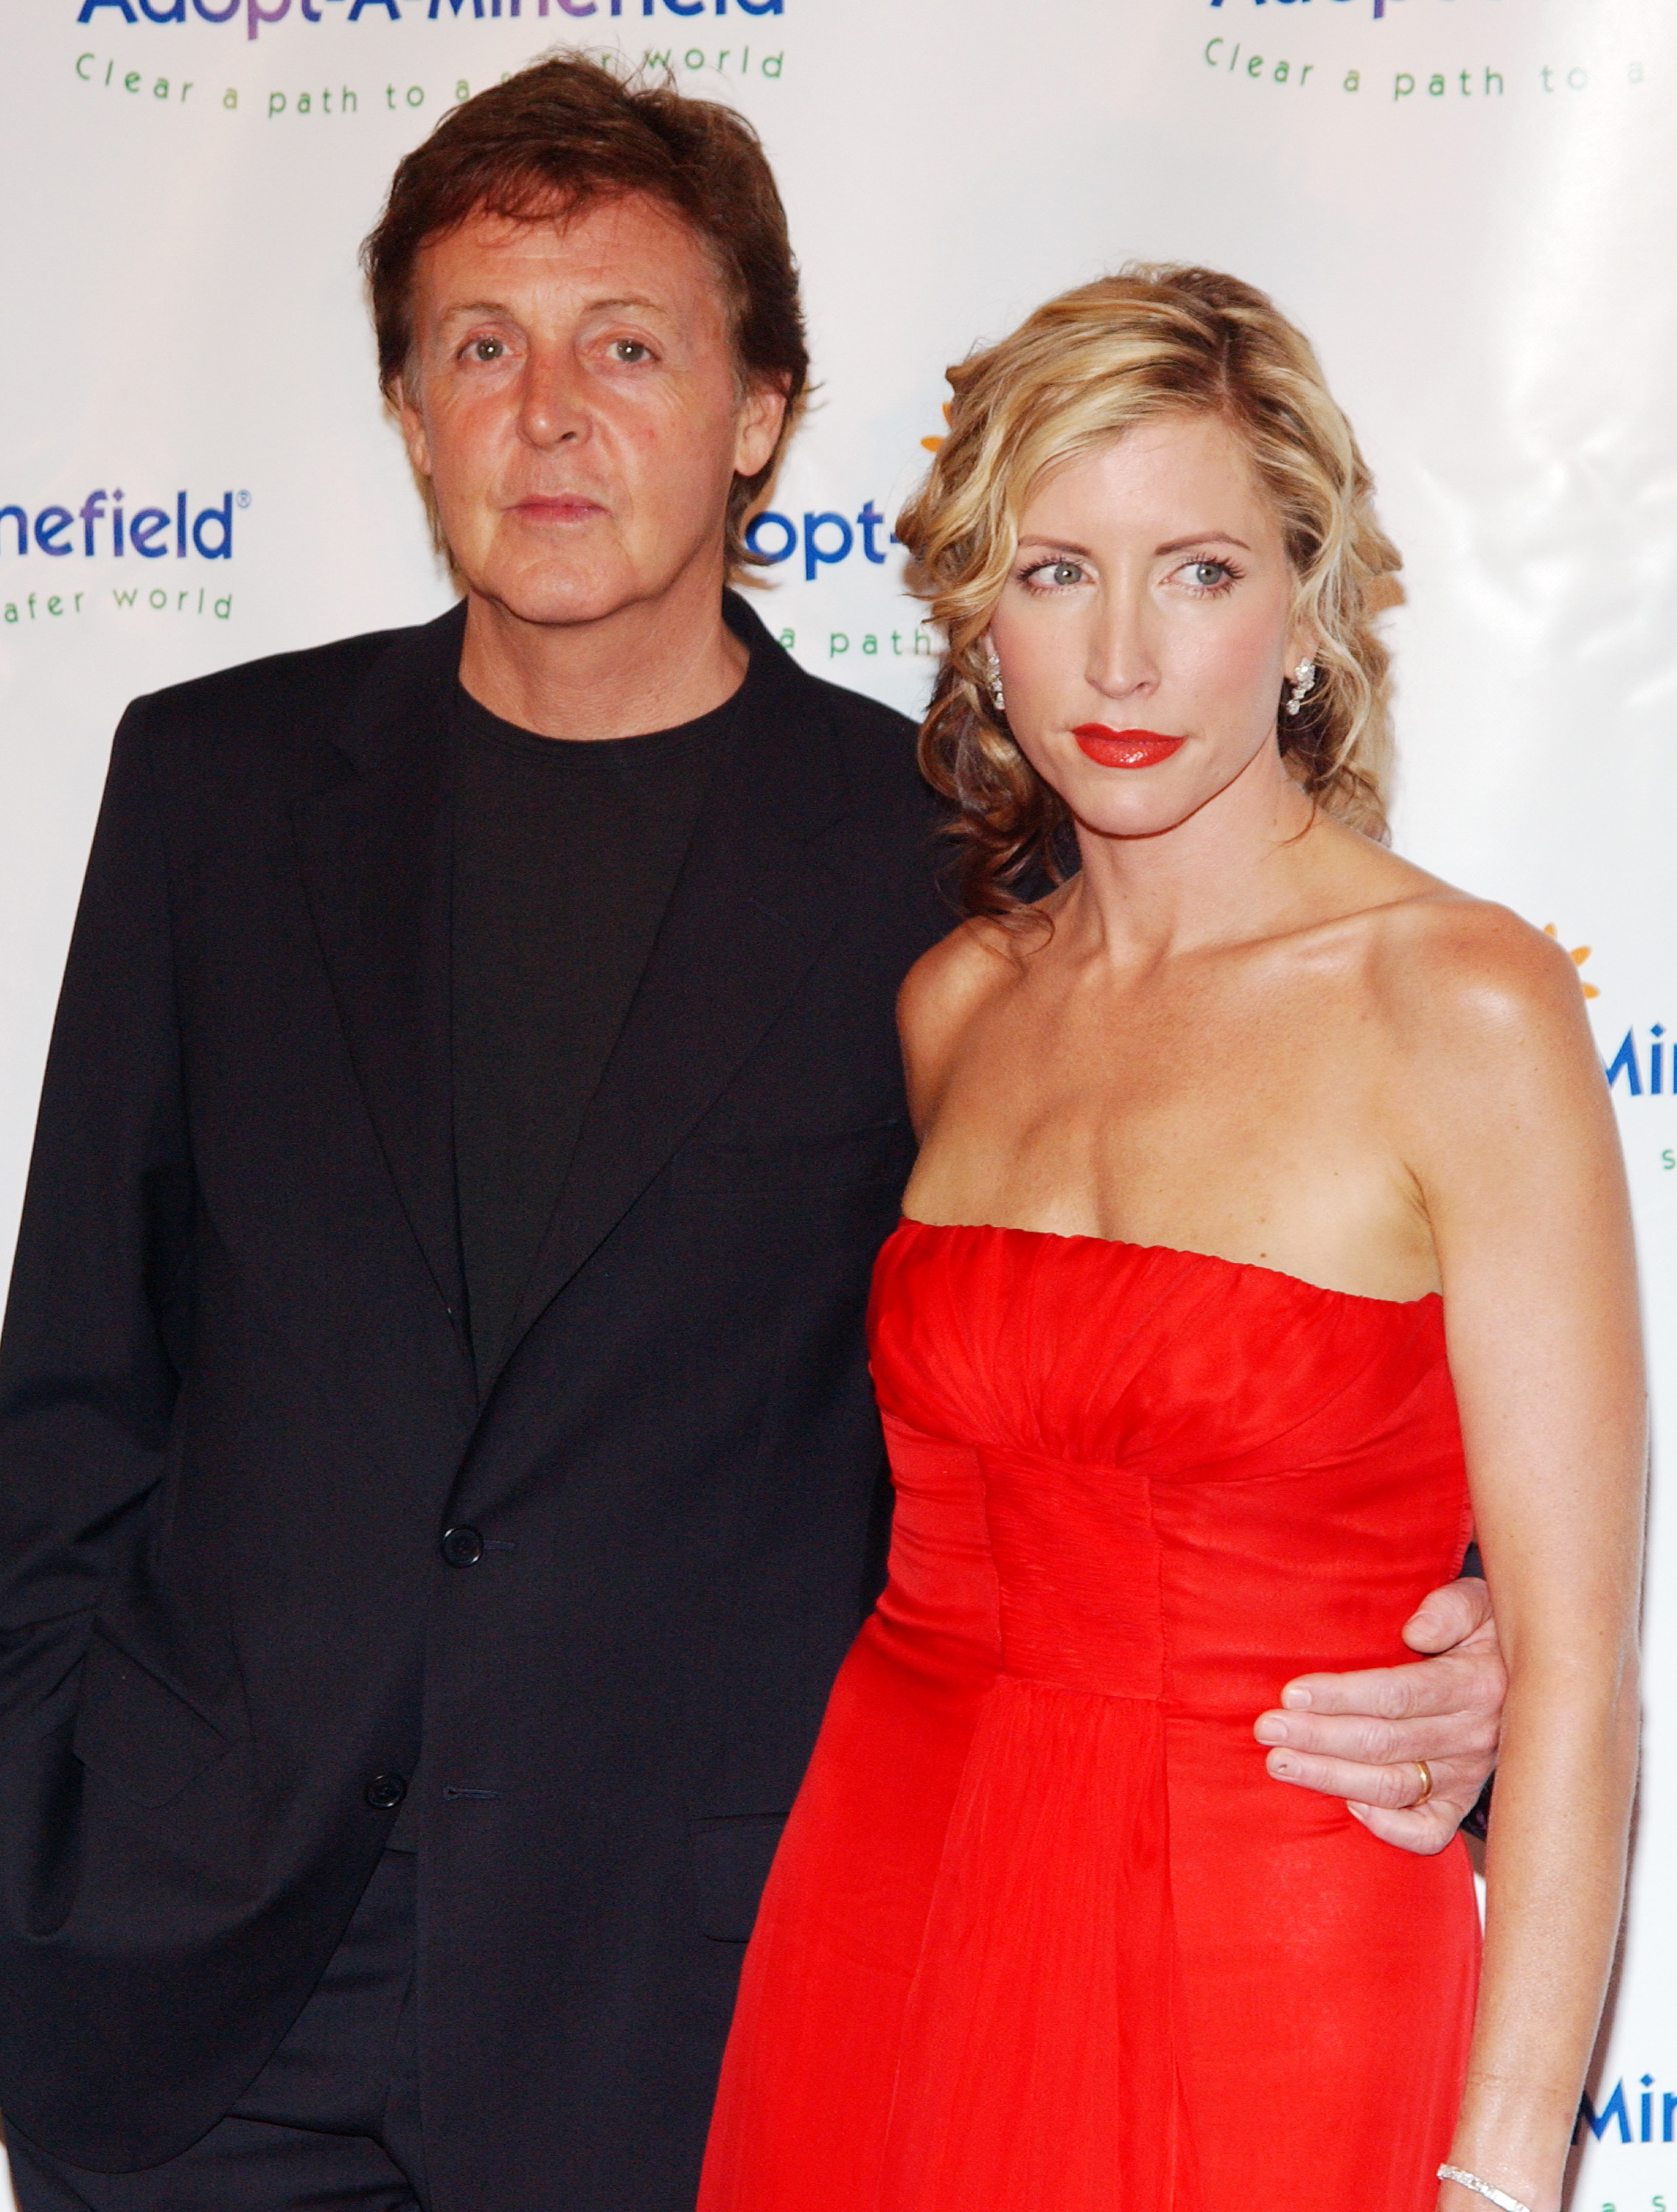 Paul McCartney and Heather Mills at the 4th Annual Adopt-A-Minefield benefit gala on October 15, 2004 | Source: Getty Images